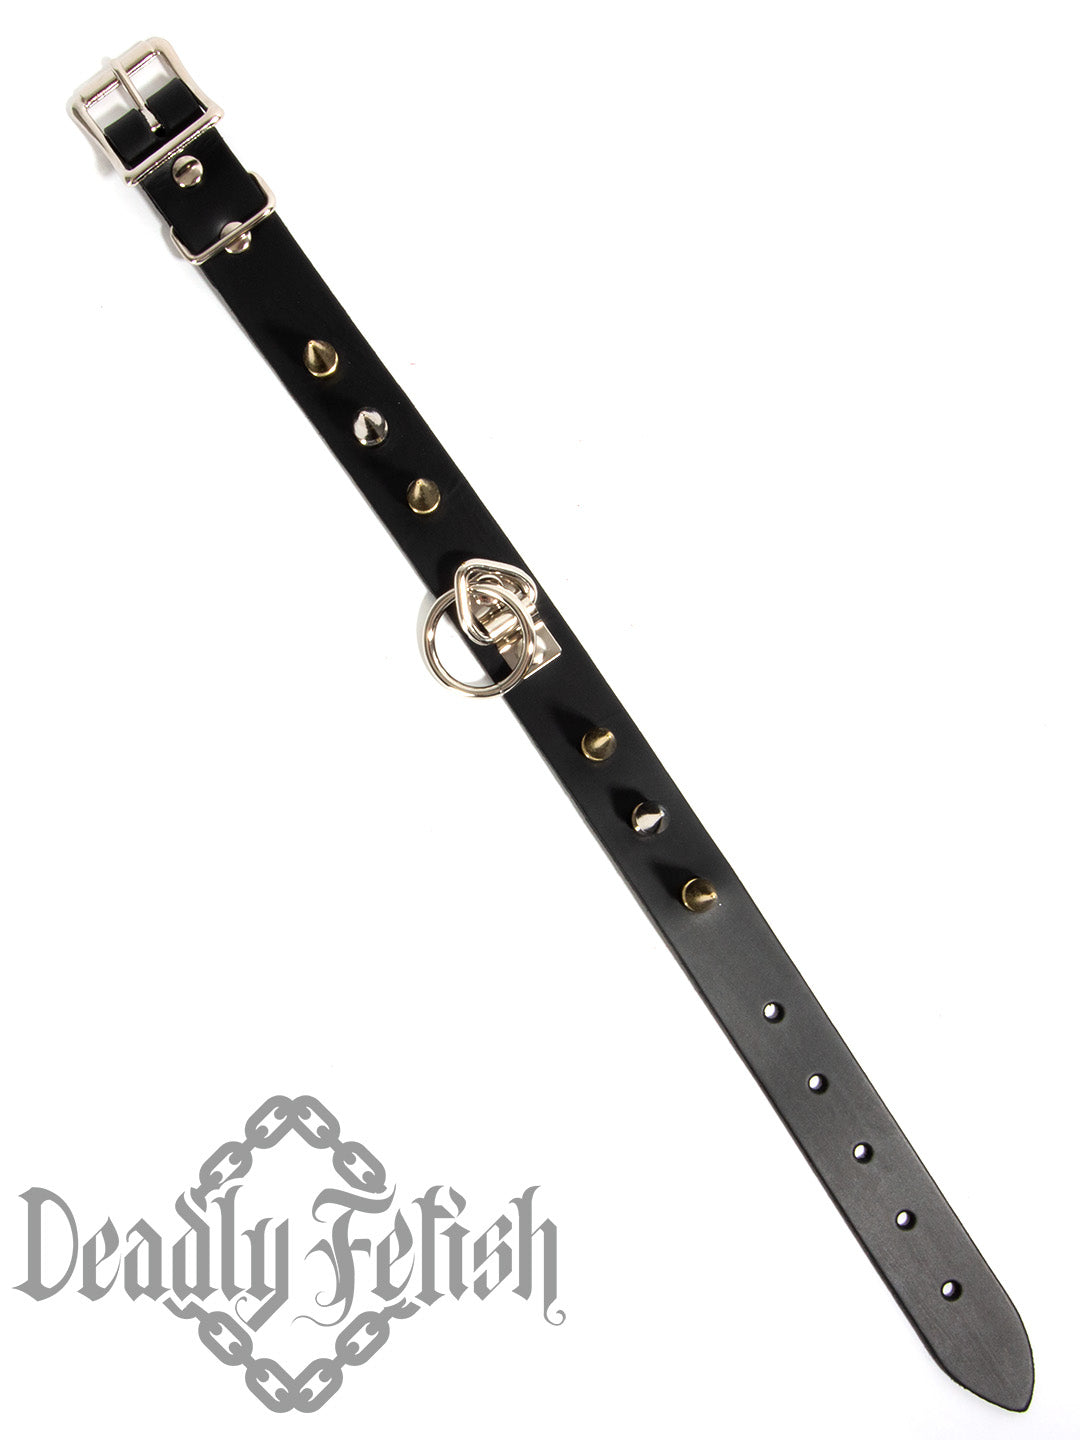 Deadly Fetish Leather: Collar #08